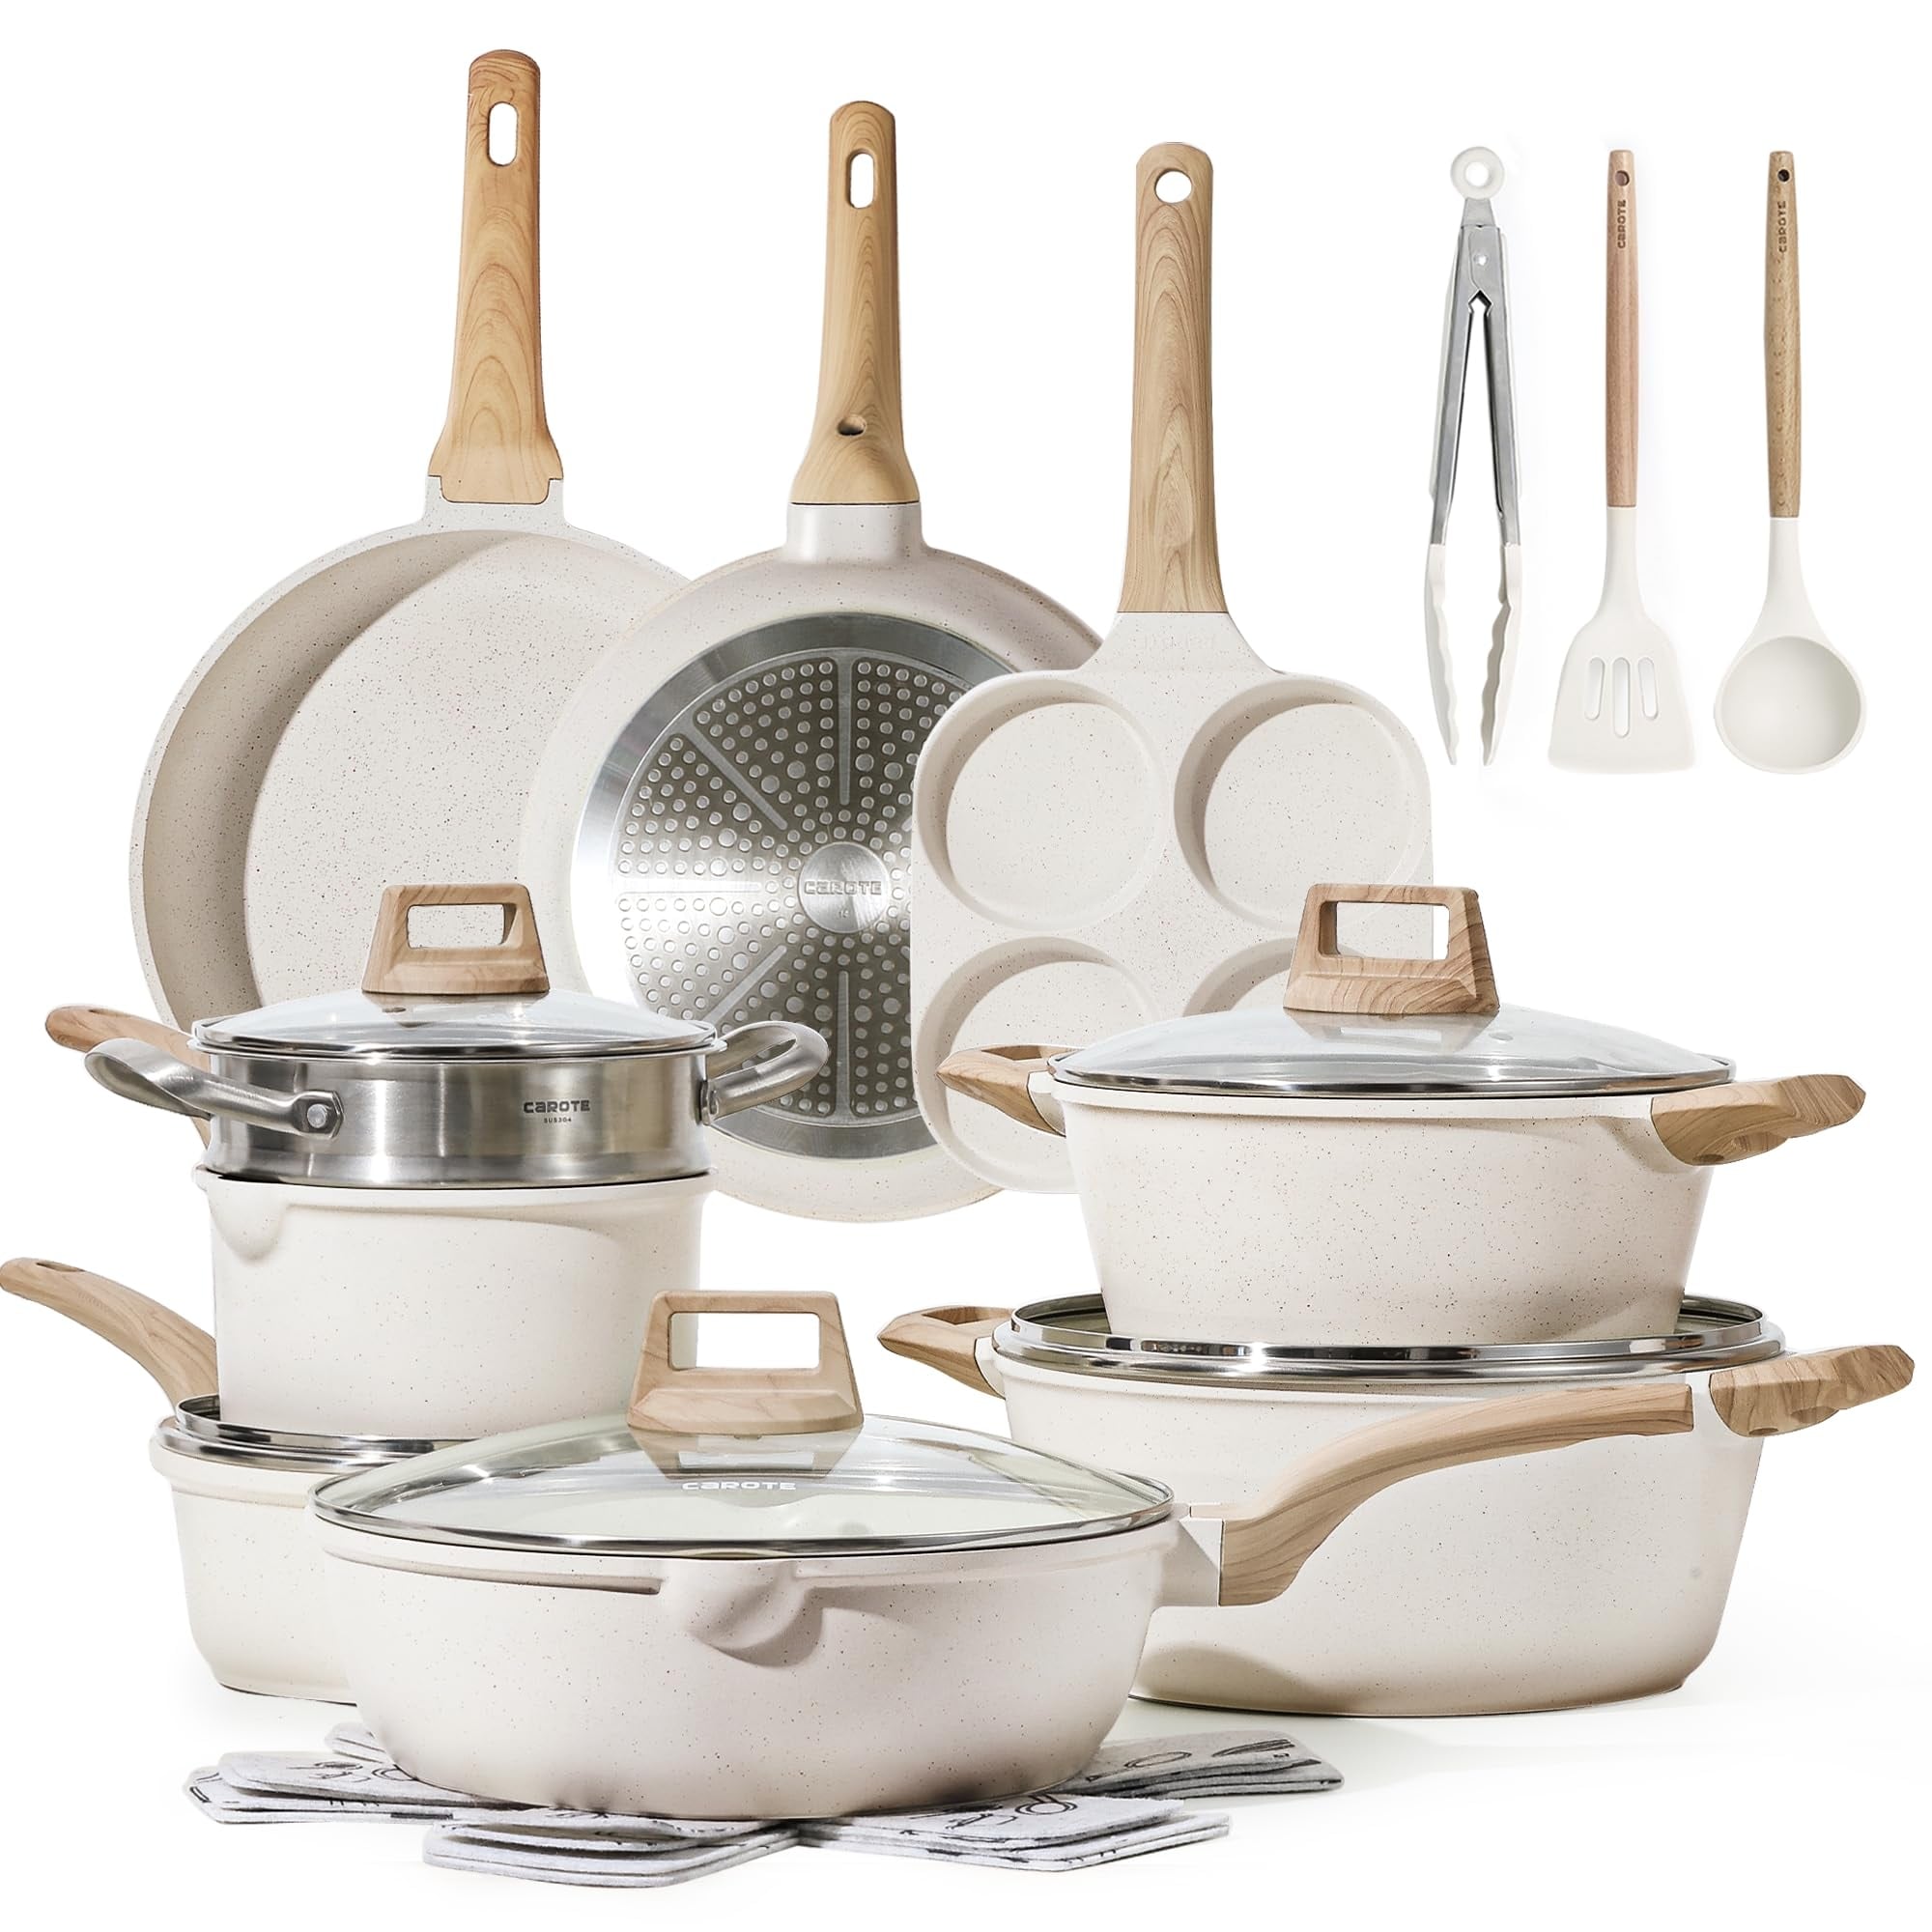 On Sale Cookware Sets - Bed Bath & Beyond